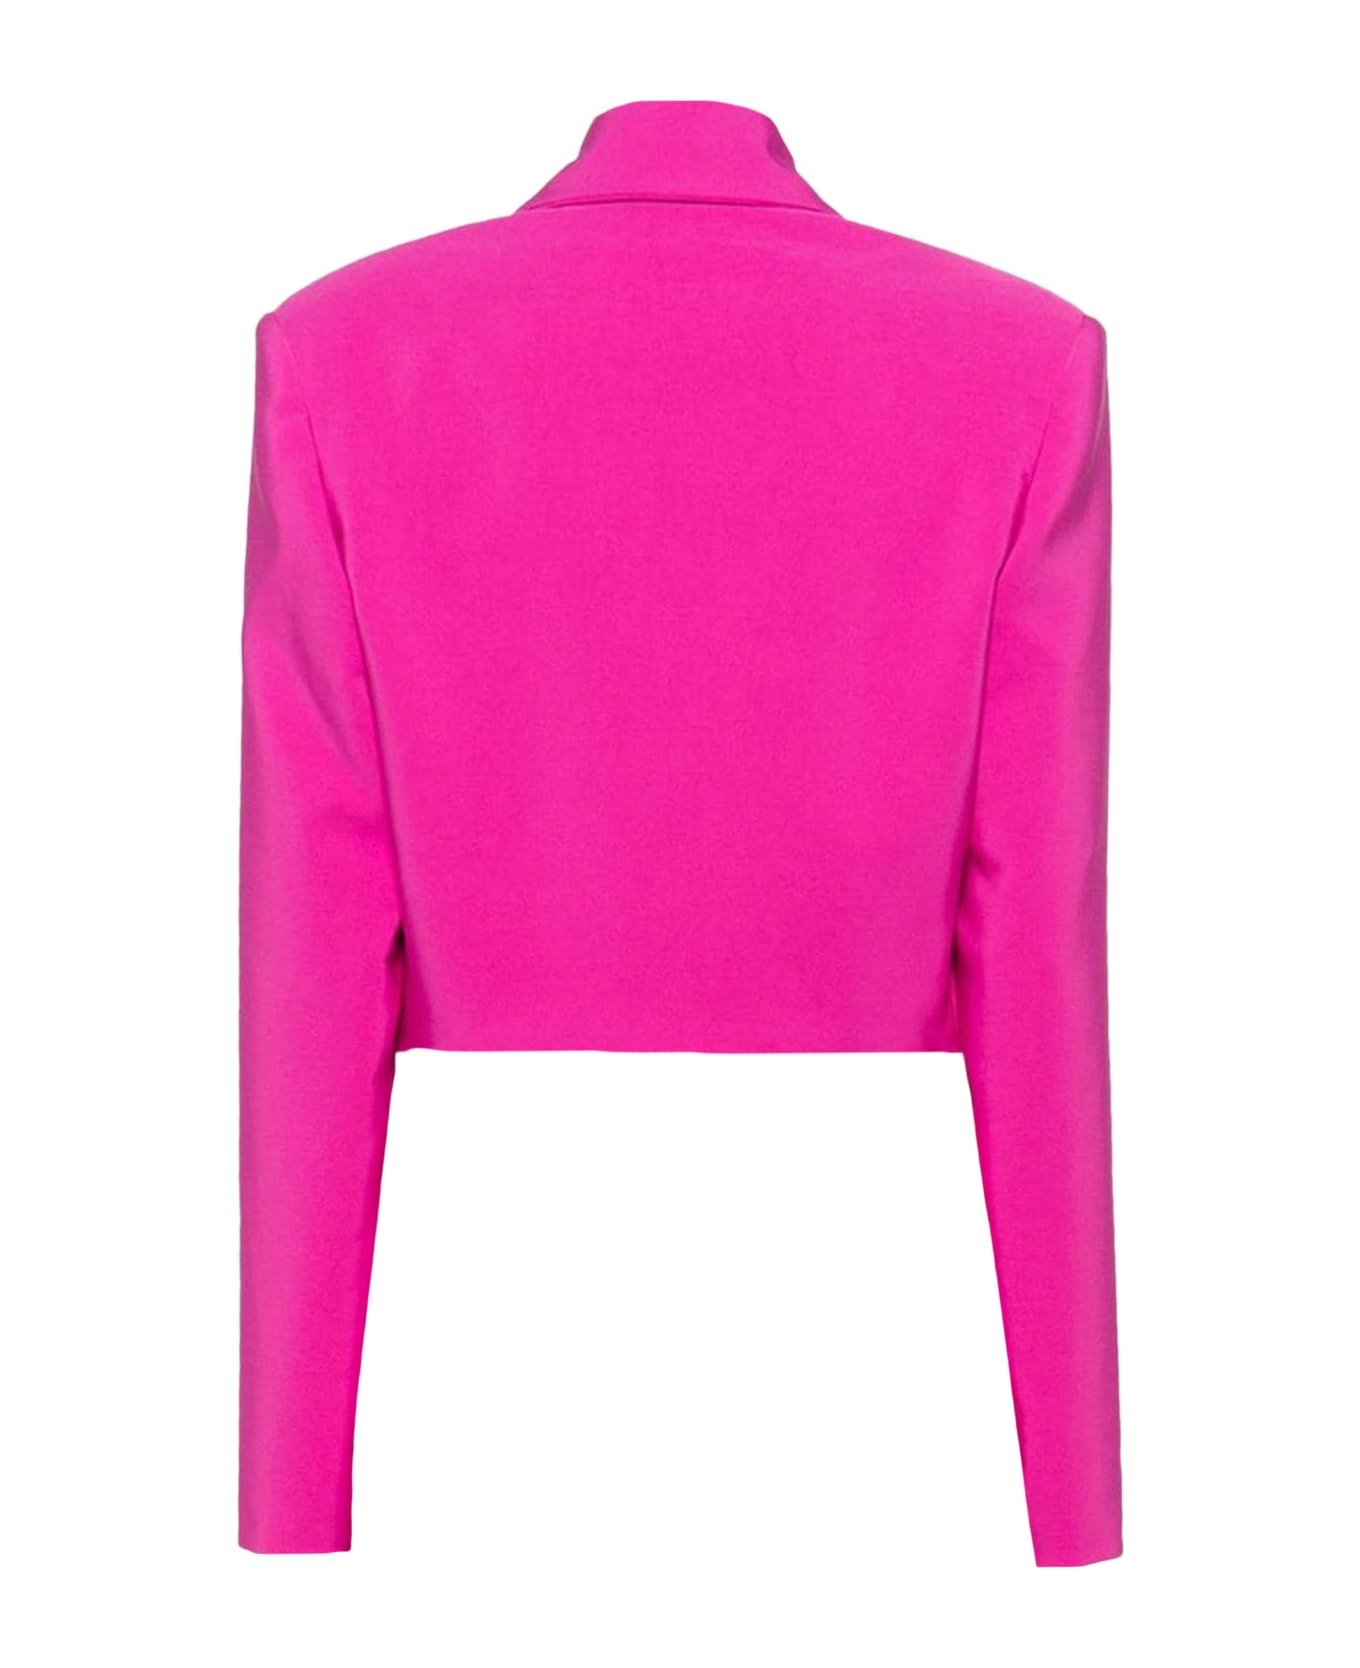 Genny Cropped Jacket With Lapels - Pink